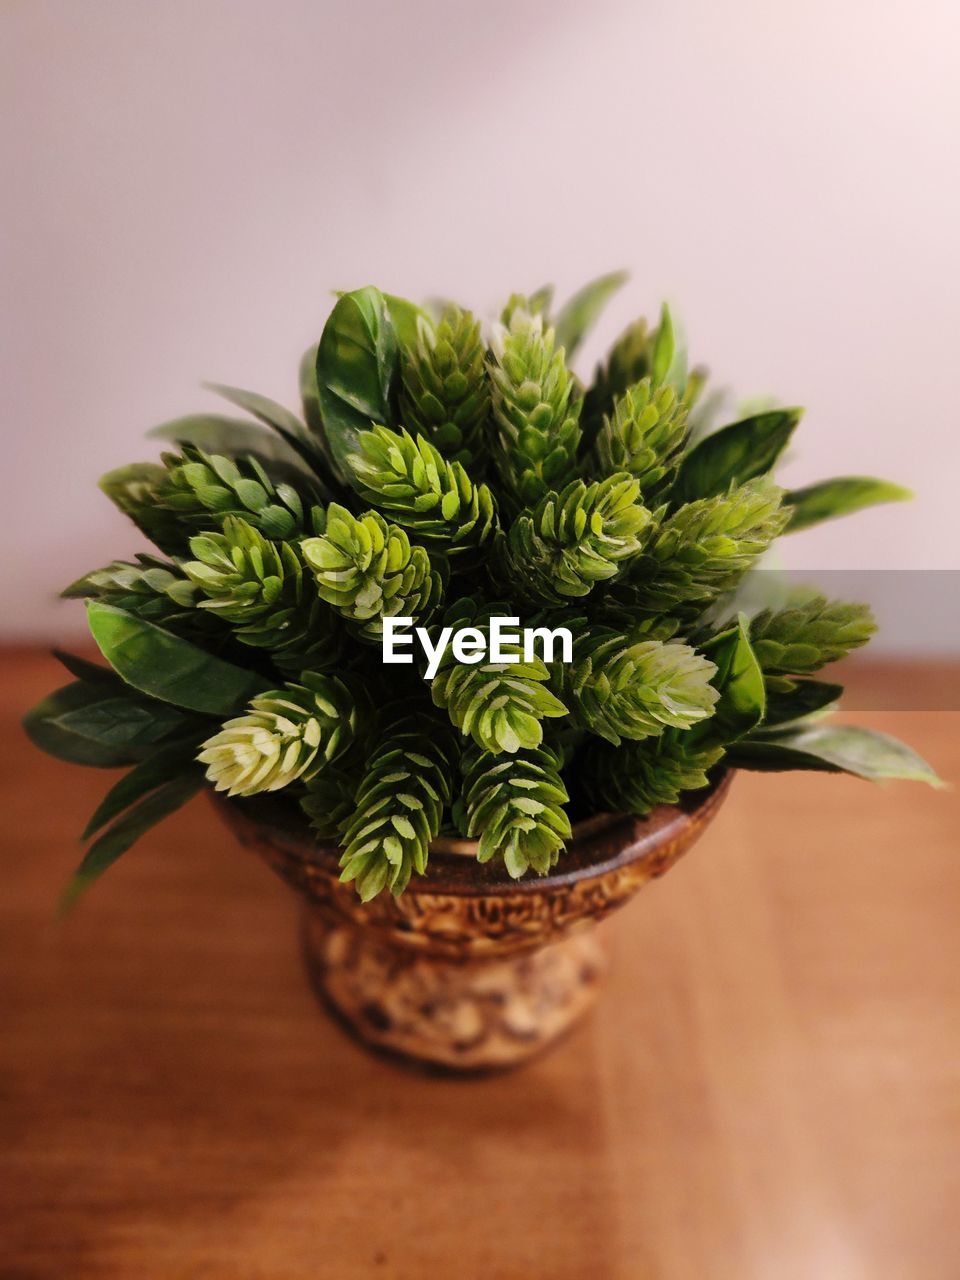 green, plant, floral design, floristry, indoors, nature, flower, no people, food and drink, freshness, wood, food, table, leaf, bouquet, plant part, wellbeing, close-up, houseplant, studio shot, healthy eating, vase, flowerpot, still life, potted plant, decoration, herb, beauty in nature